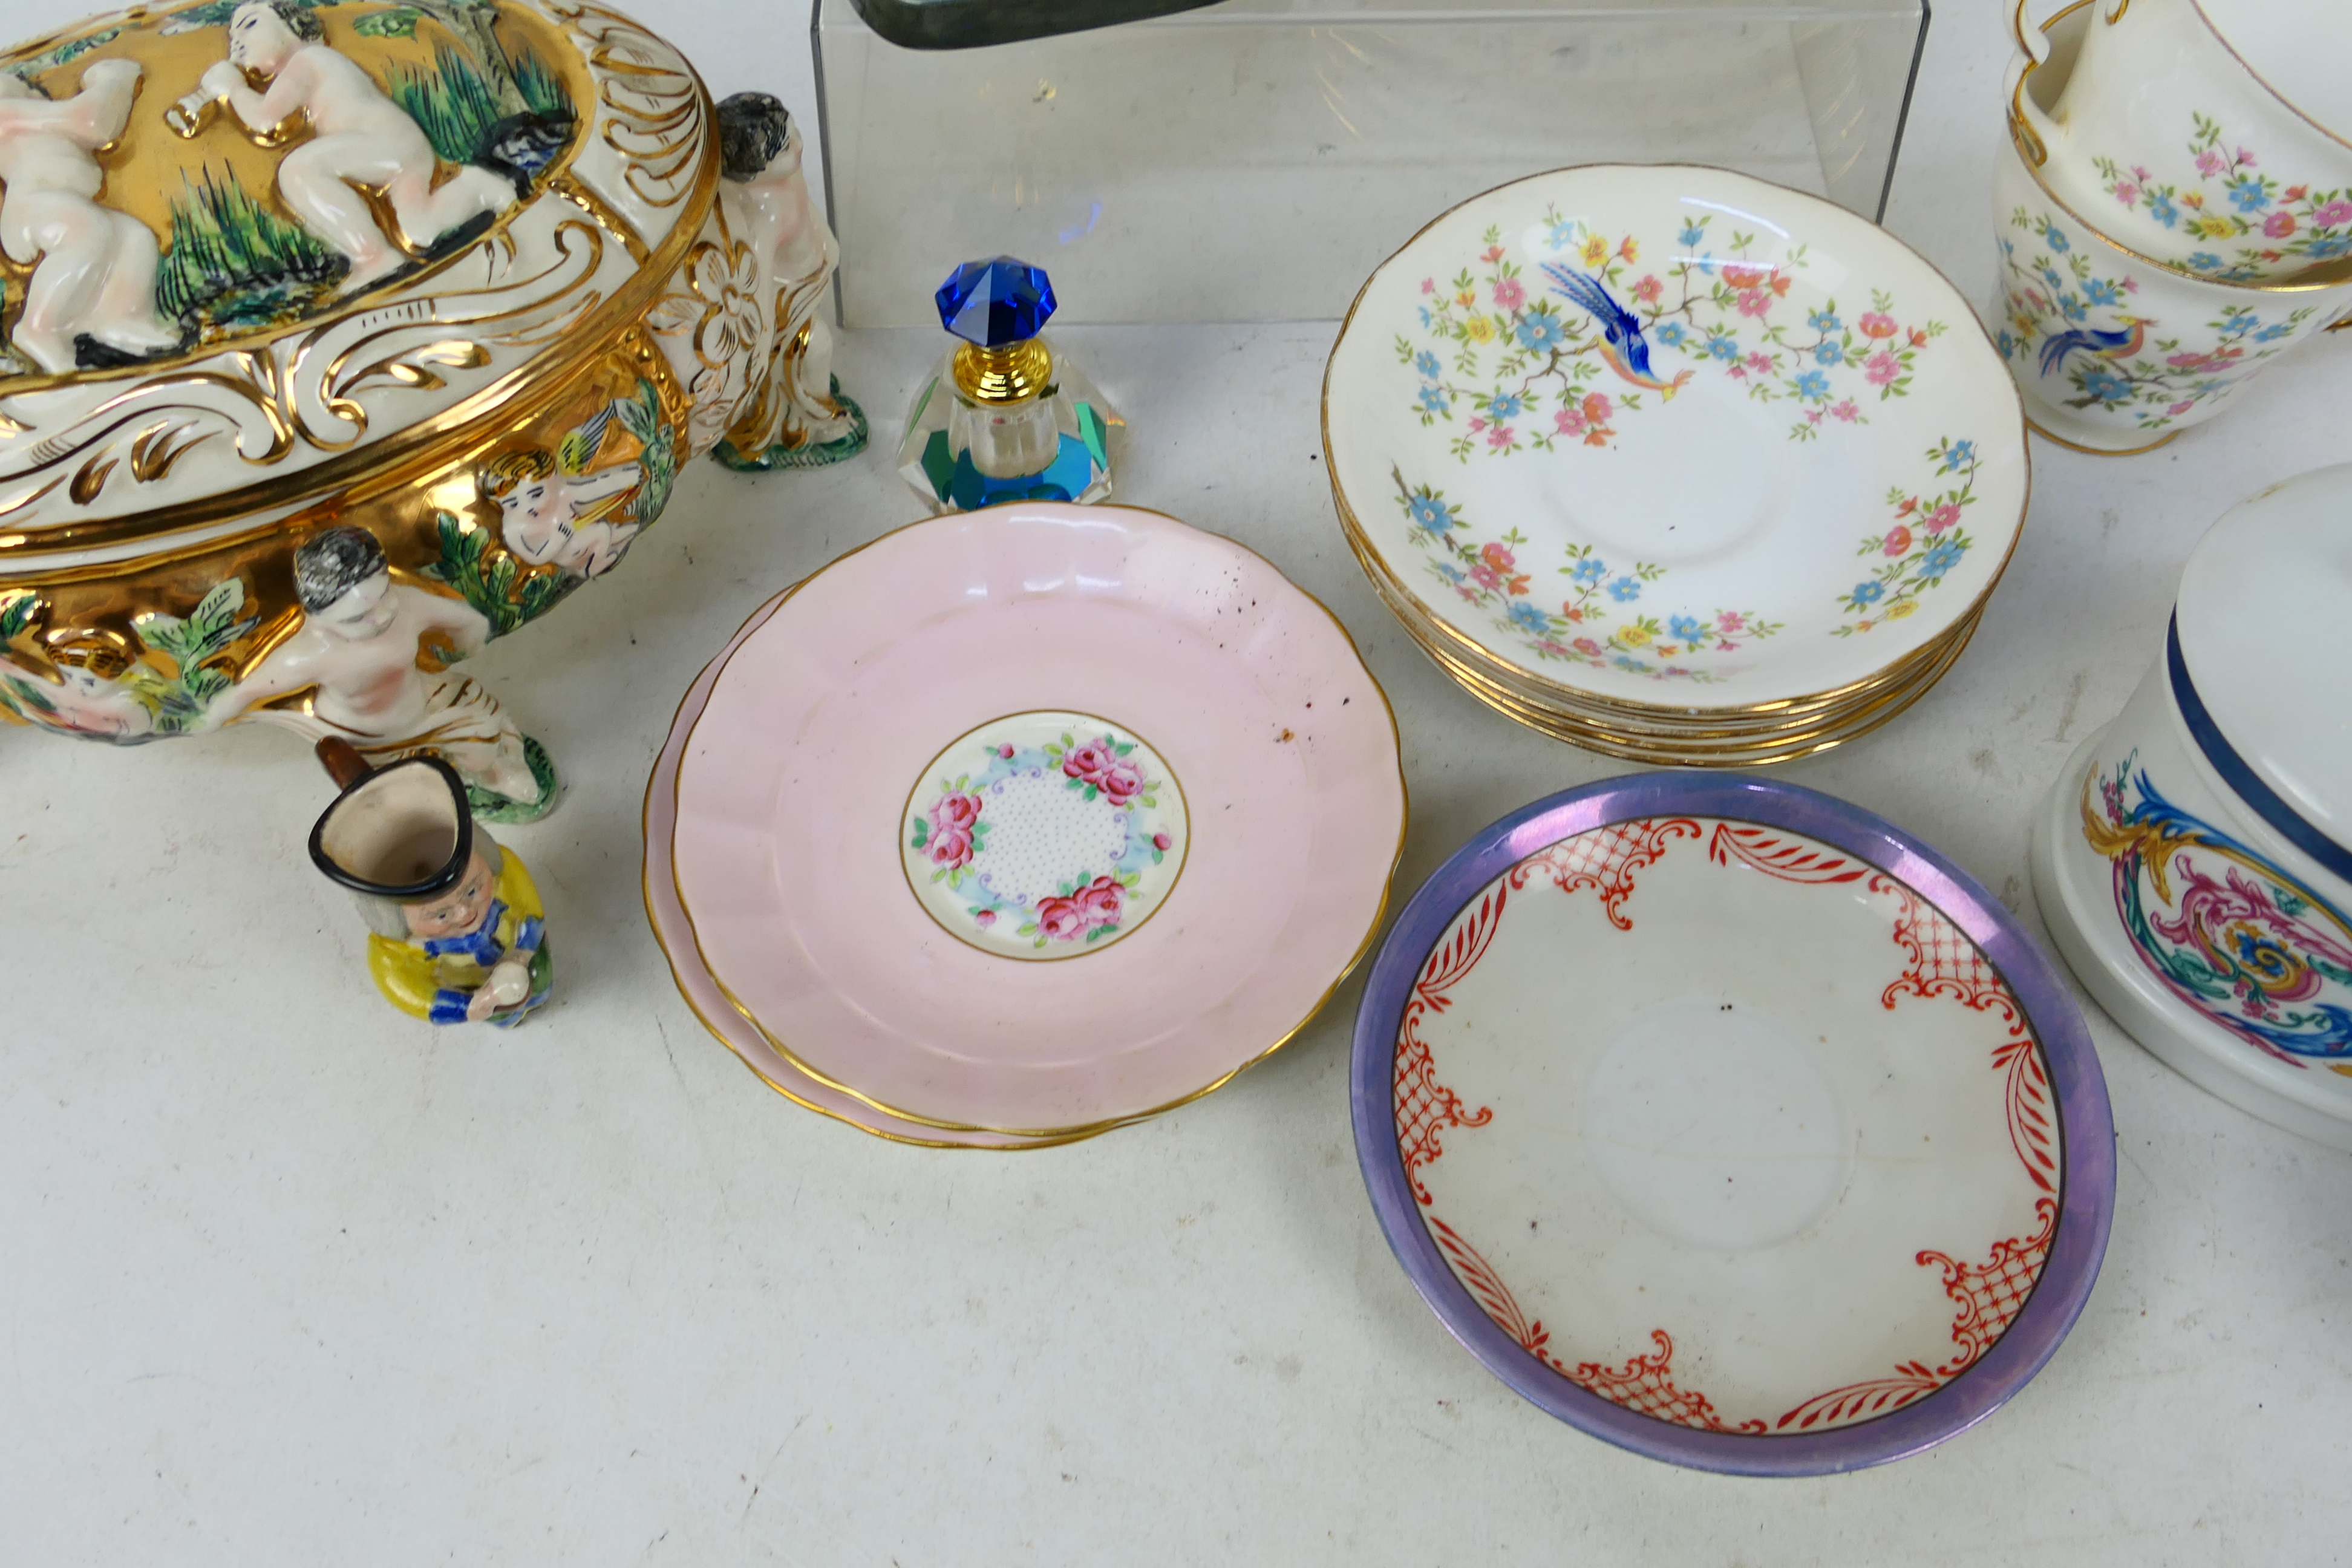 Royal Doulton, Adderley, Queen Anne, Other - Mixed ceramics to include plates, cups, jugs, vases, - Image 6 of 6